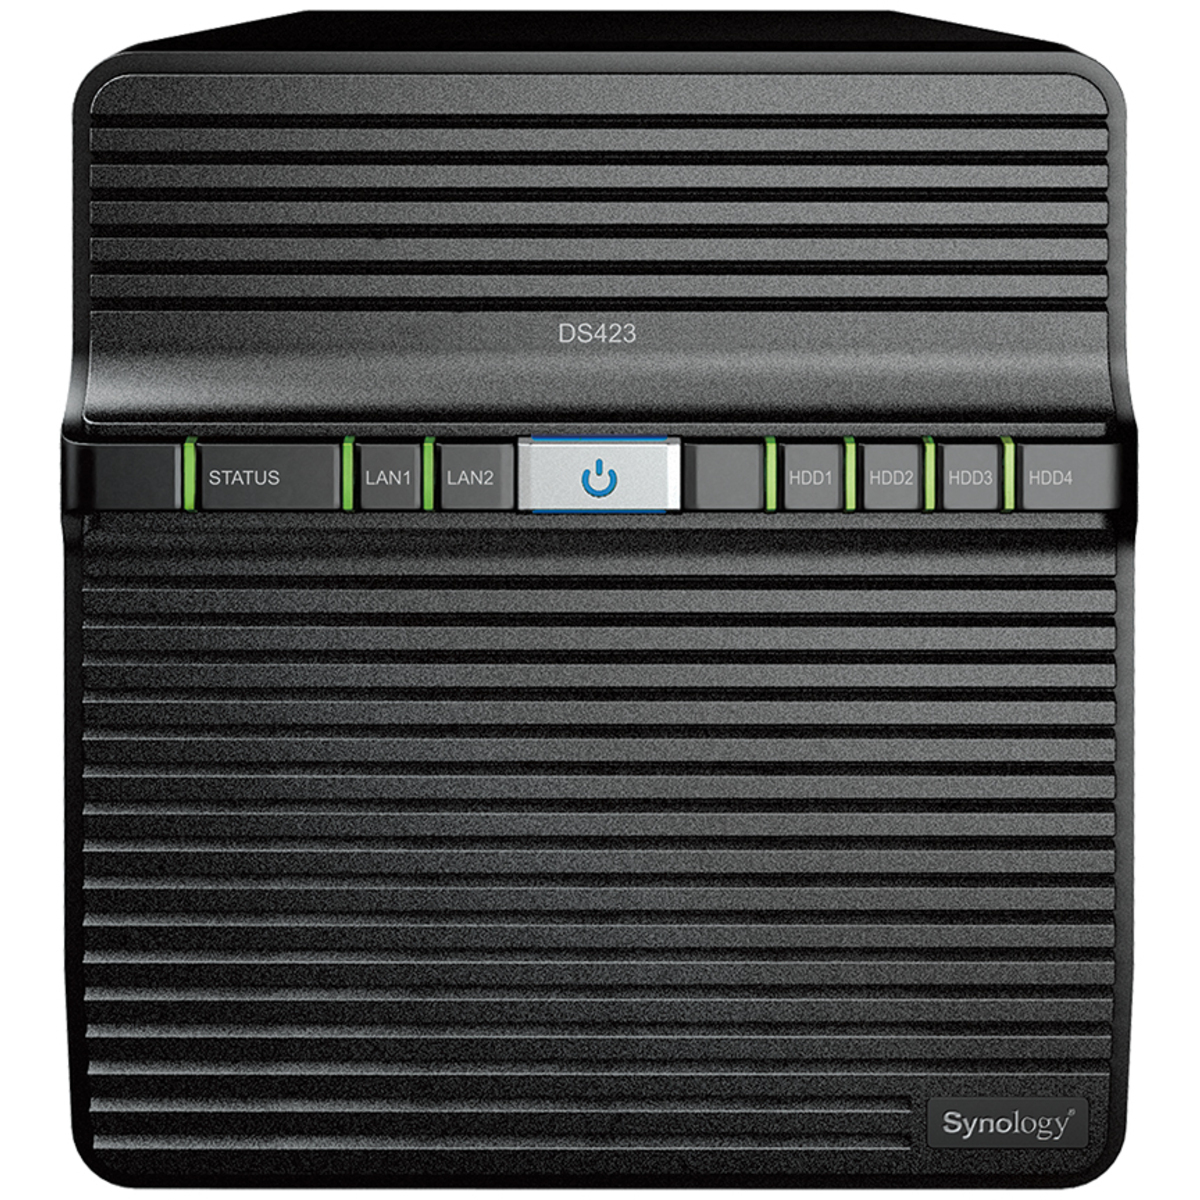 Synology DiskStation DS423 32tb 4-Bay Desktop Personal / Basic Home / Small Office NAS - Network Attached Storage Device 4x8tb Seagate EXOS 7E10 ST8000NM017B 3.5 7200rpm SATA 6Gb/s HDD ENTERPRISE Class Drives Installed - Burn-In Tested DiskStation DS423